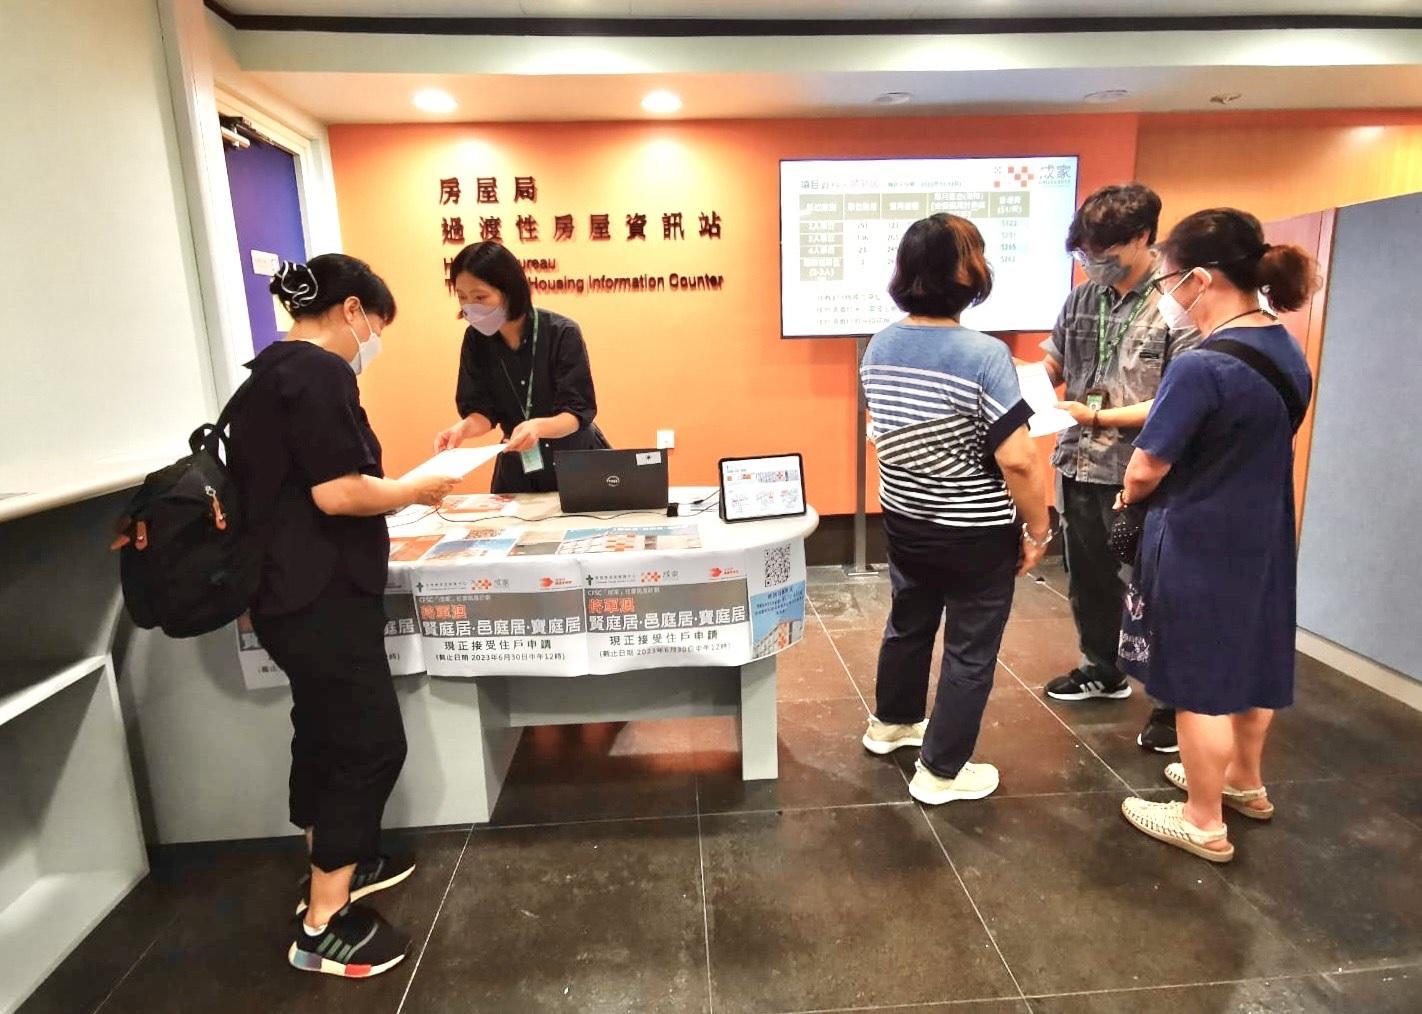 The Housing Bureau has all along been promoting the development of transitional housing, including ongoing efforts to strengthen its co-ordination and improve the application process. Information on transitional housing can be obtained through various channels including the Transitional Housing Information Counter located at the Hong Kong Housing Authority Customer Service Centre and the Cash Allowance Office of the Housing Department. Photo shows the Information Counter at the Hong Kong Housing Authority Customer Service Centre.